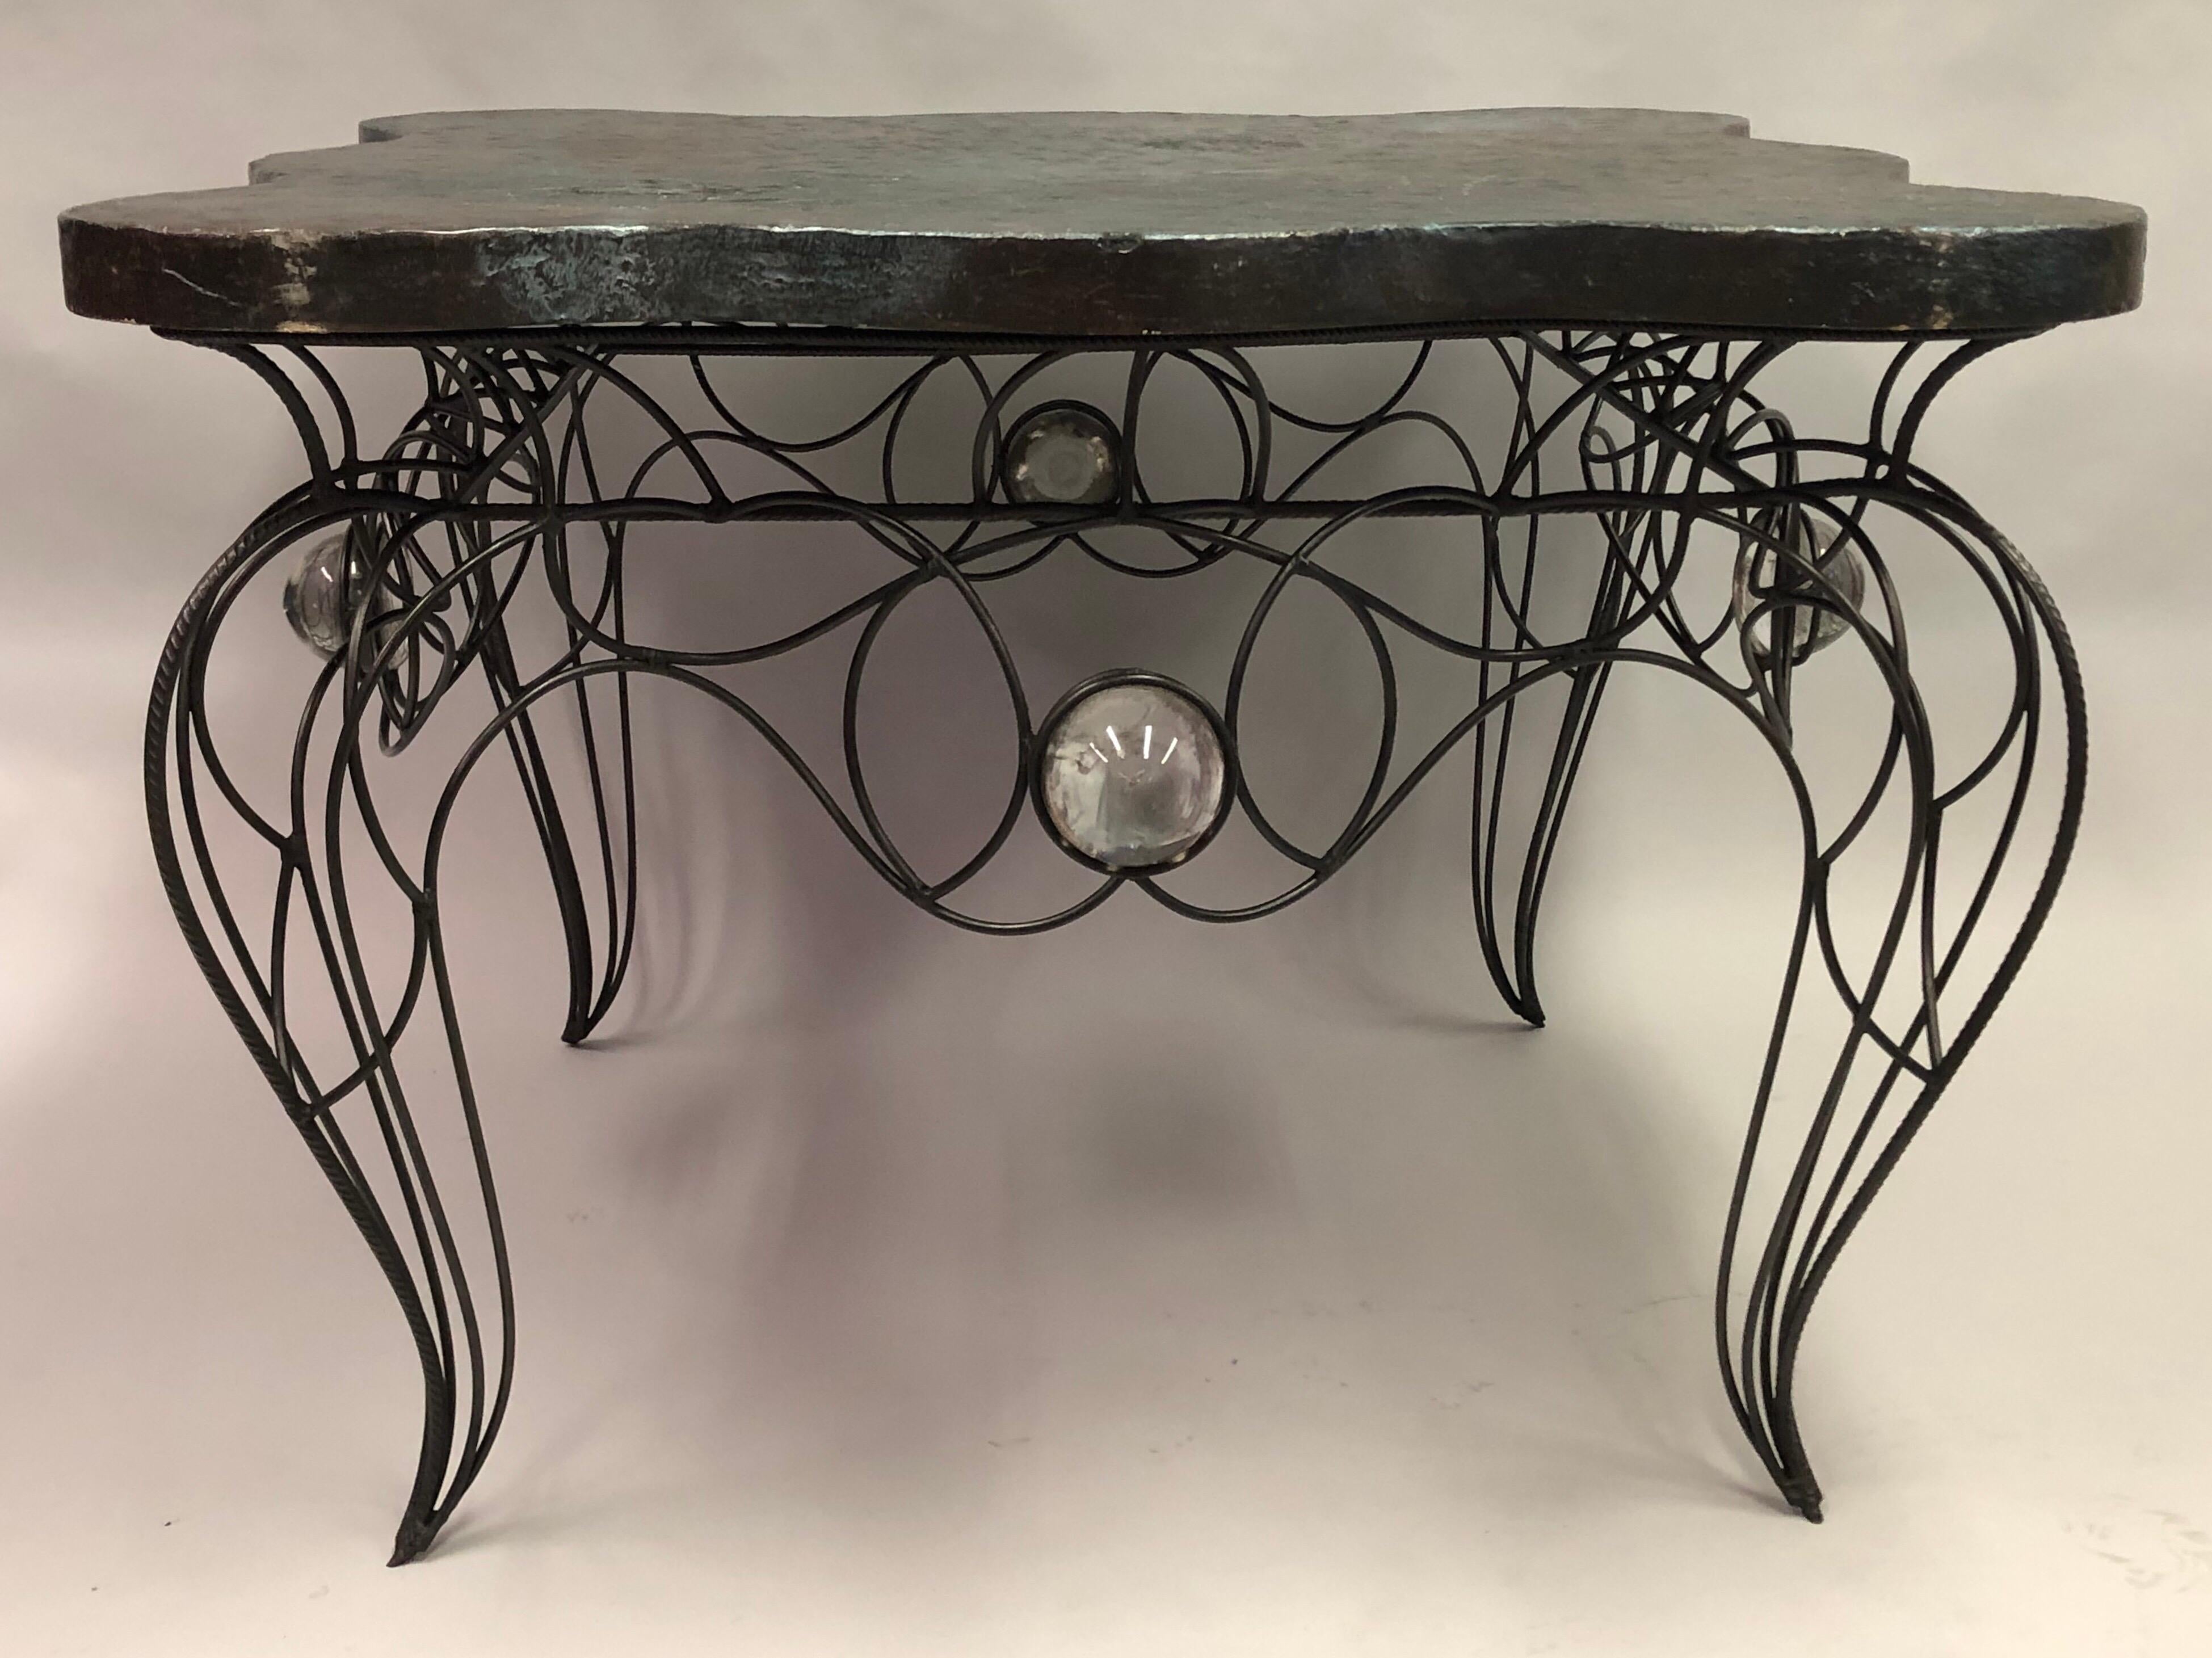 Unique, early, handmade, wrought iron and crystal center or dining table by Andre Dubreuil, 1986.

Handwrought iron frame with four inset hand blown glass balls supporting a serpentine hand painted wood and gesso top.

Literature: 
Andre